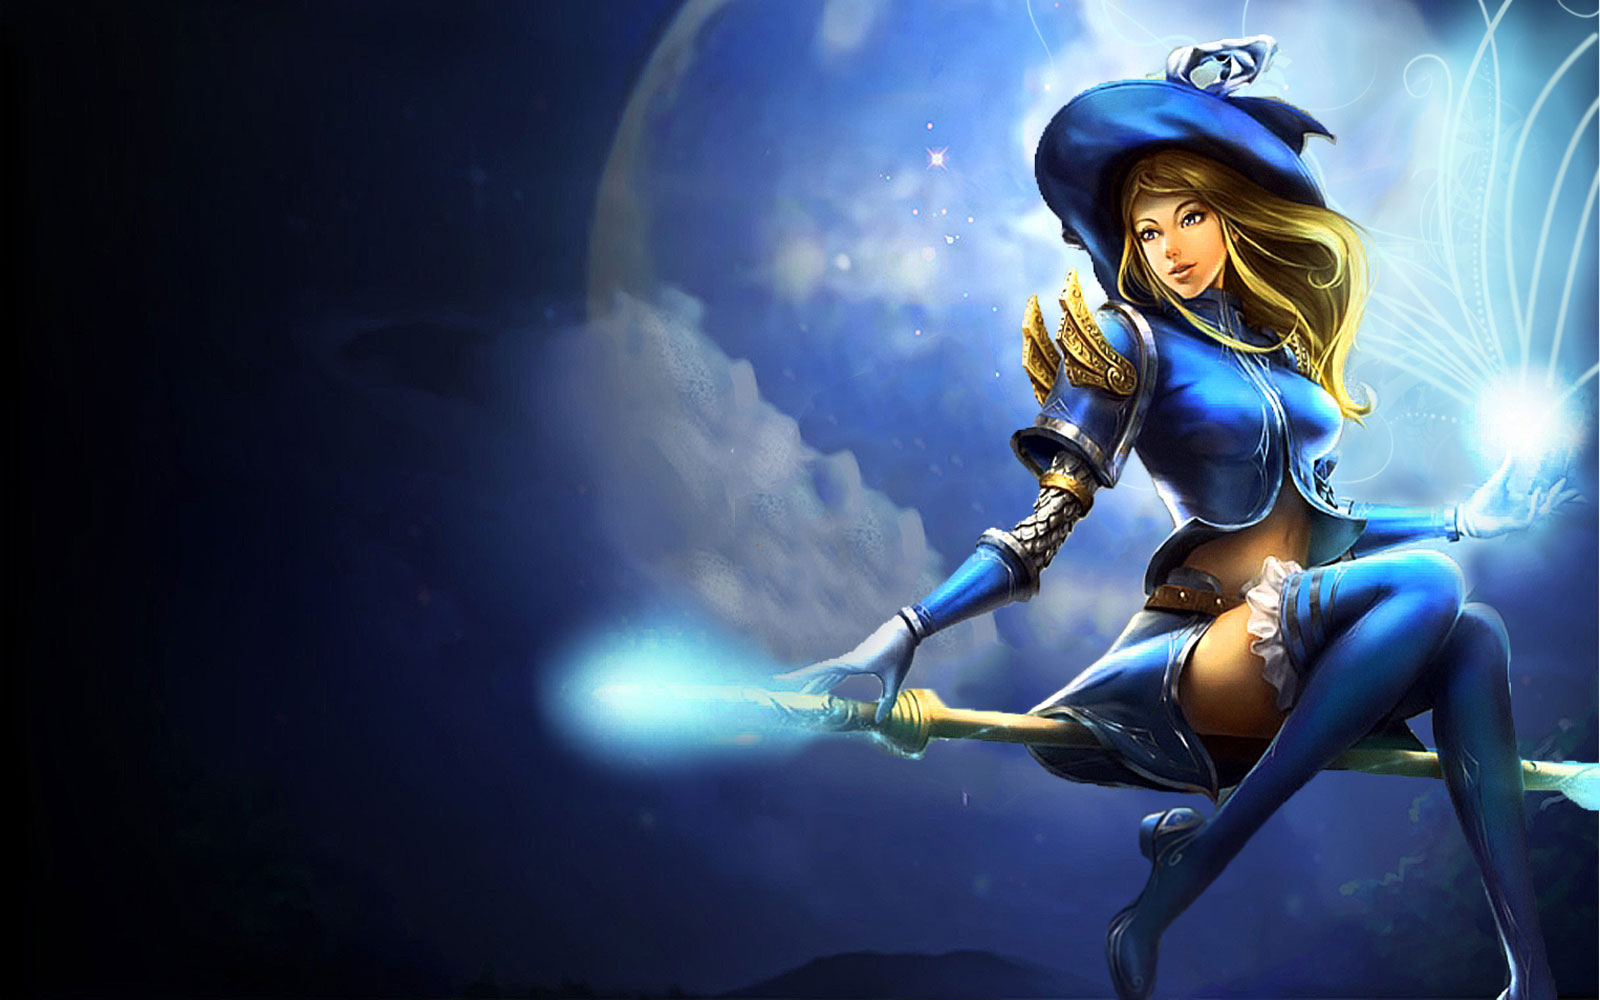 Best Free Wizard Wallpaper of all time Check it out now 